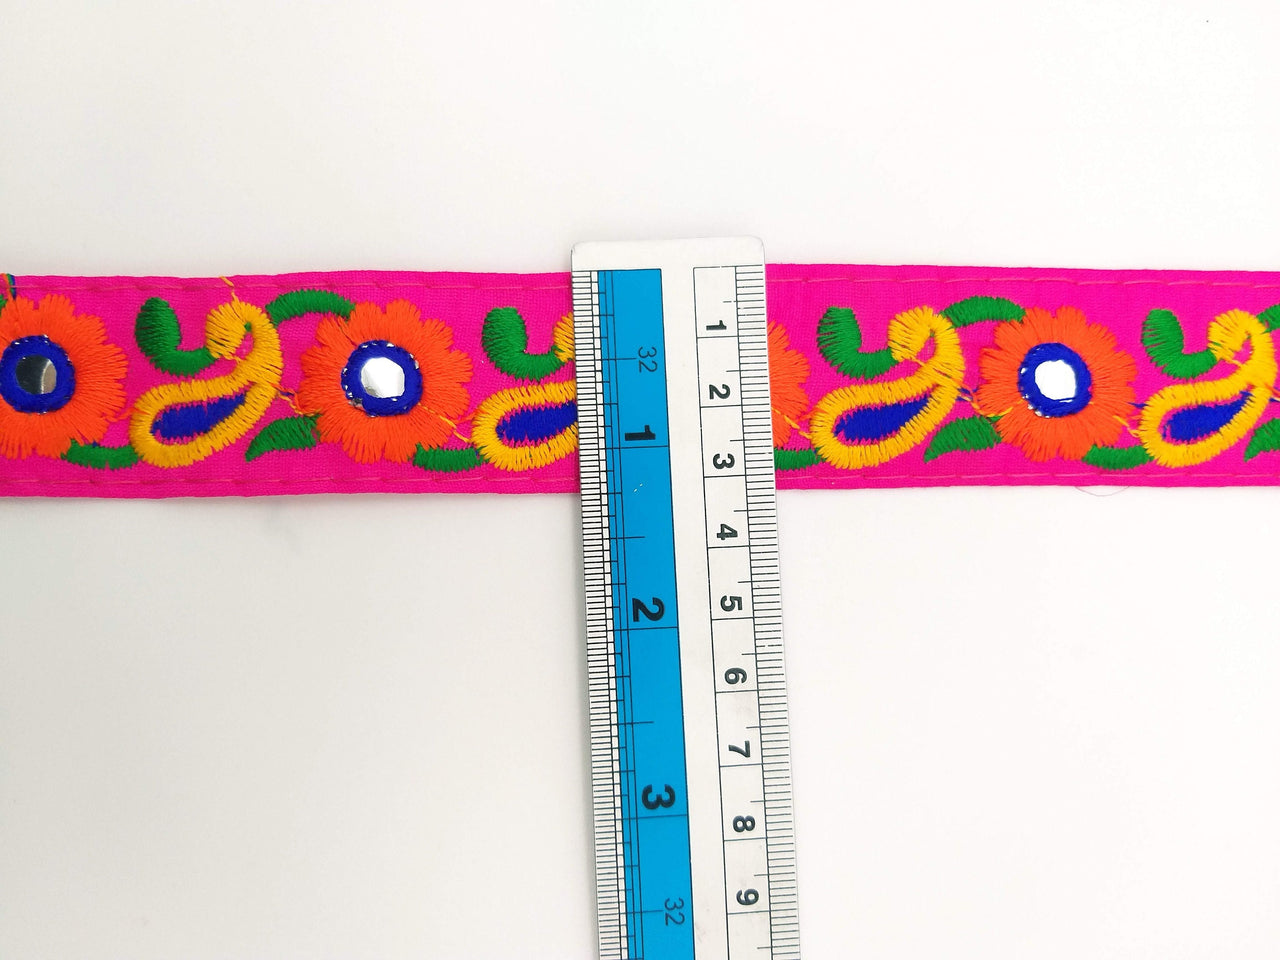 Fuchsia Pink Floral Mirrored Trim With Orange Flowers And Yellow Paisley Embroidery, Decorative Trimming, Trim By 3 Yards